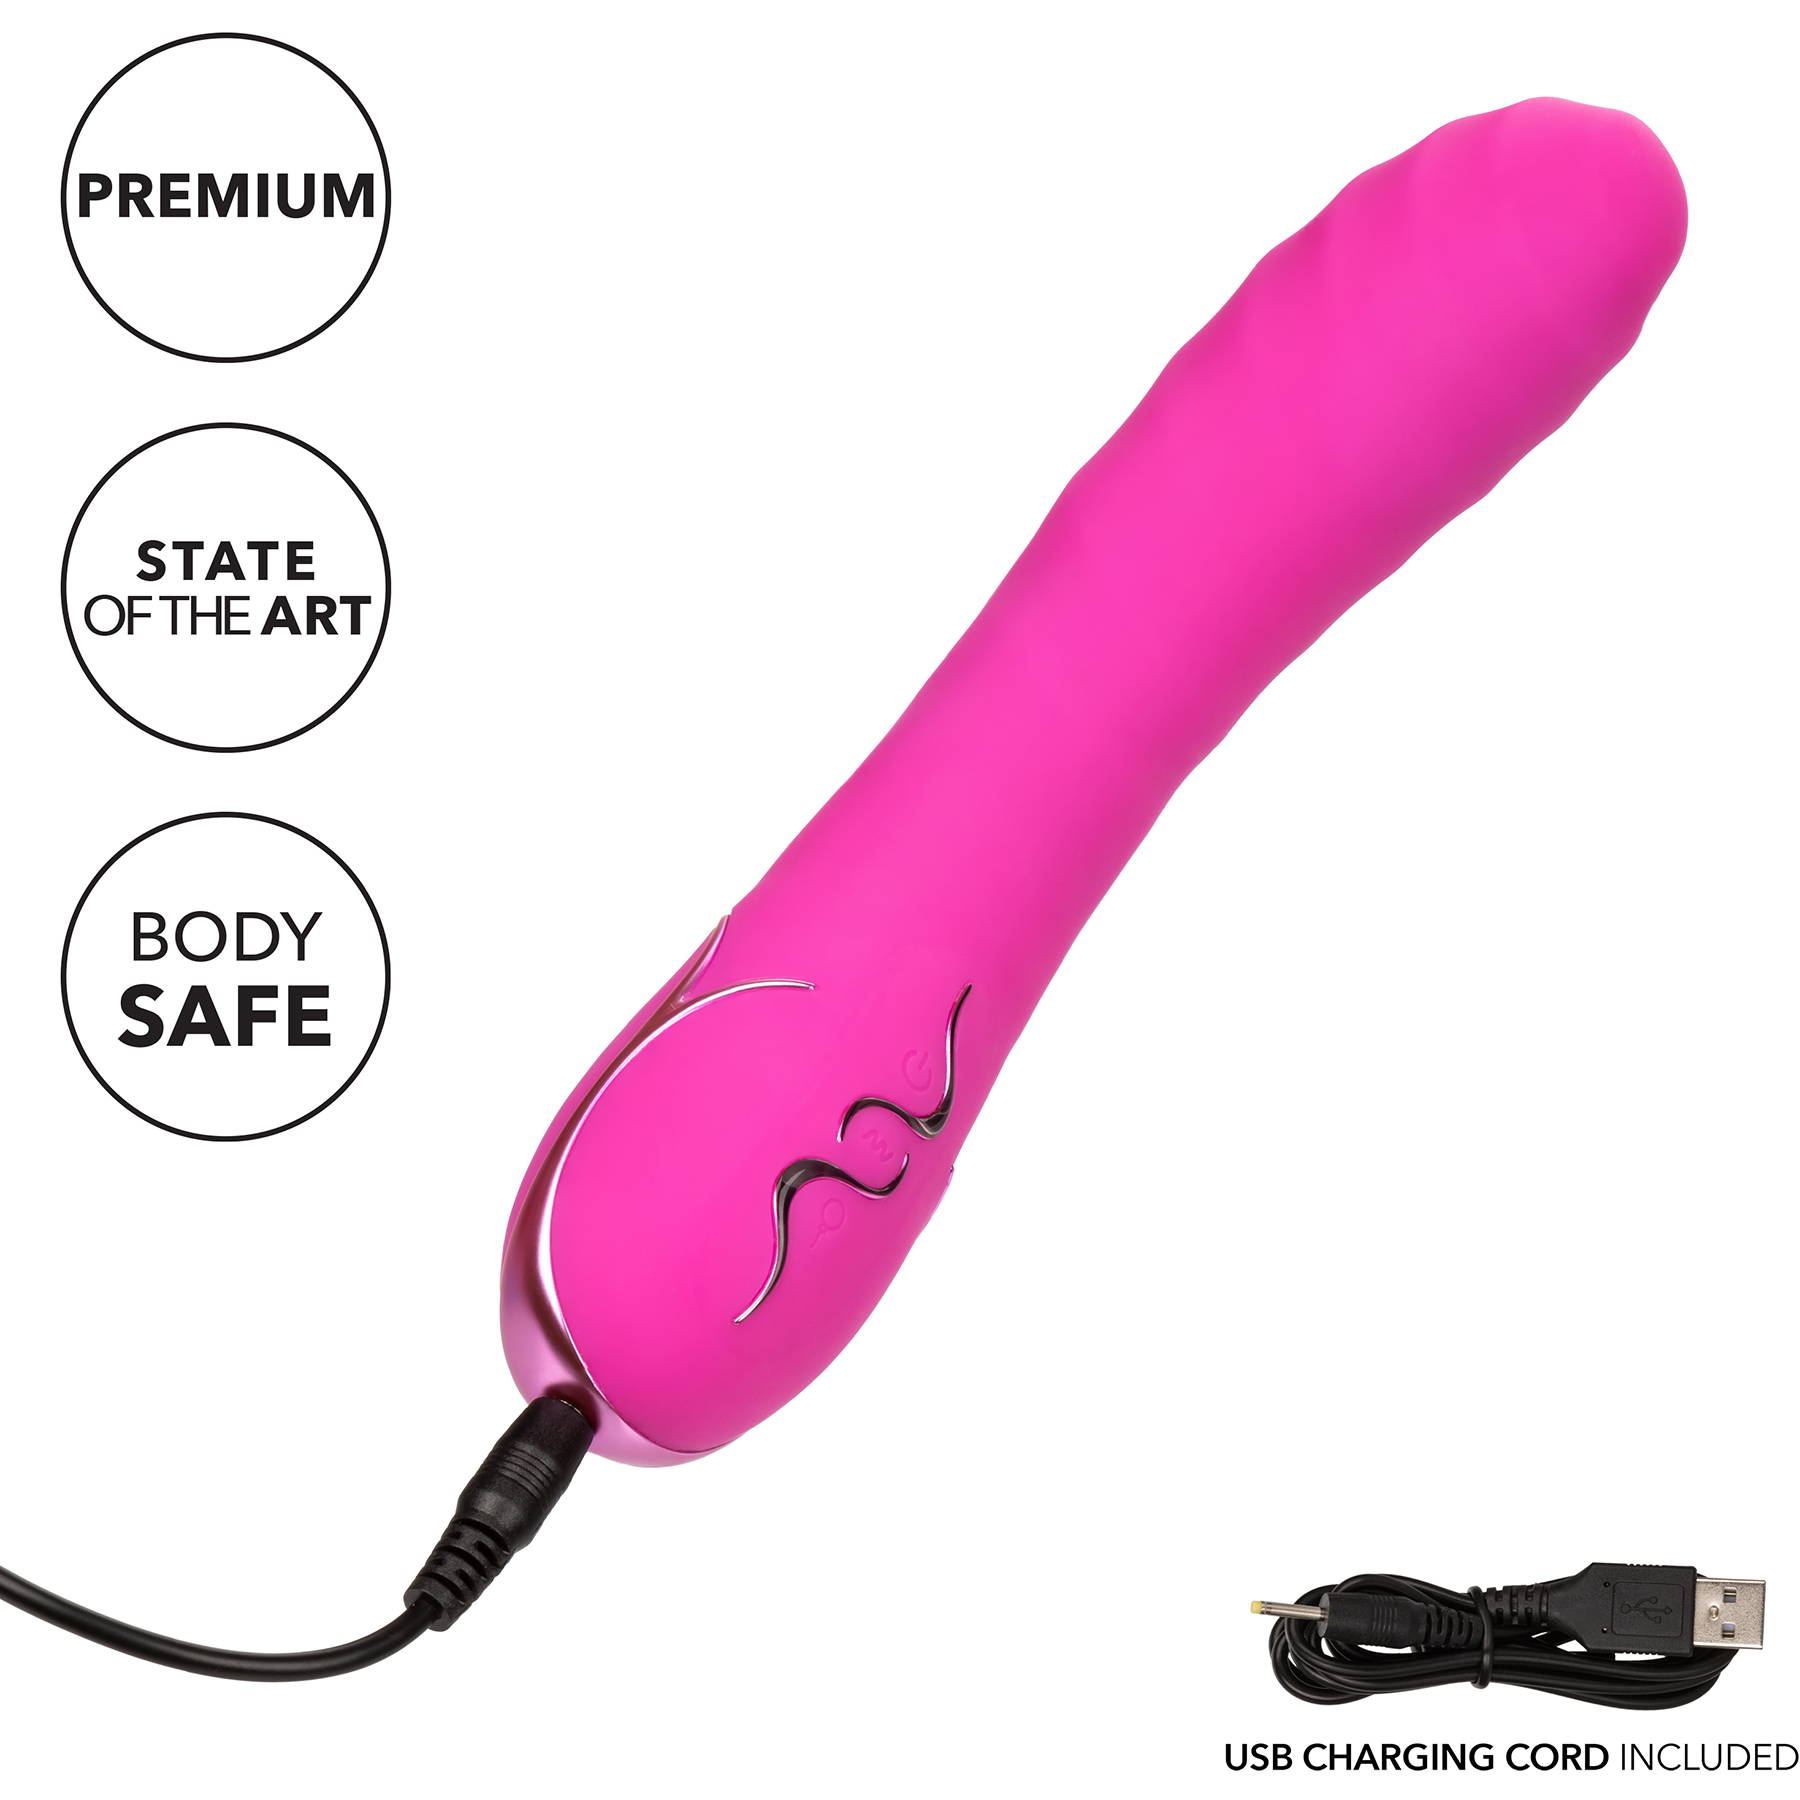  Insatiable G Inflatable G-Wand Silicone Rechargeable G-Spot Vibrator - Charging